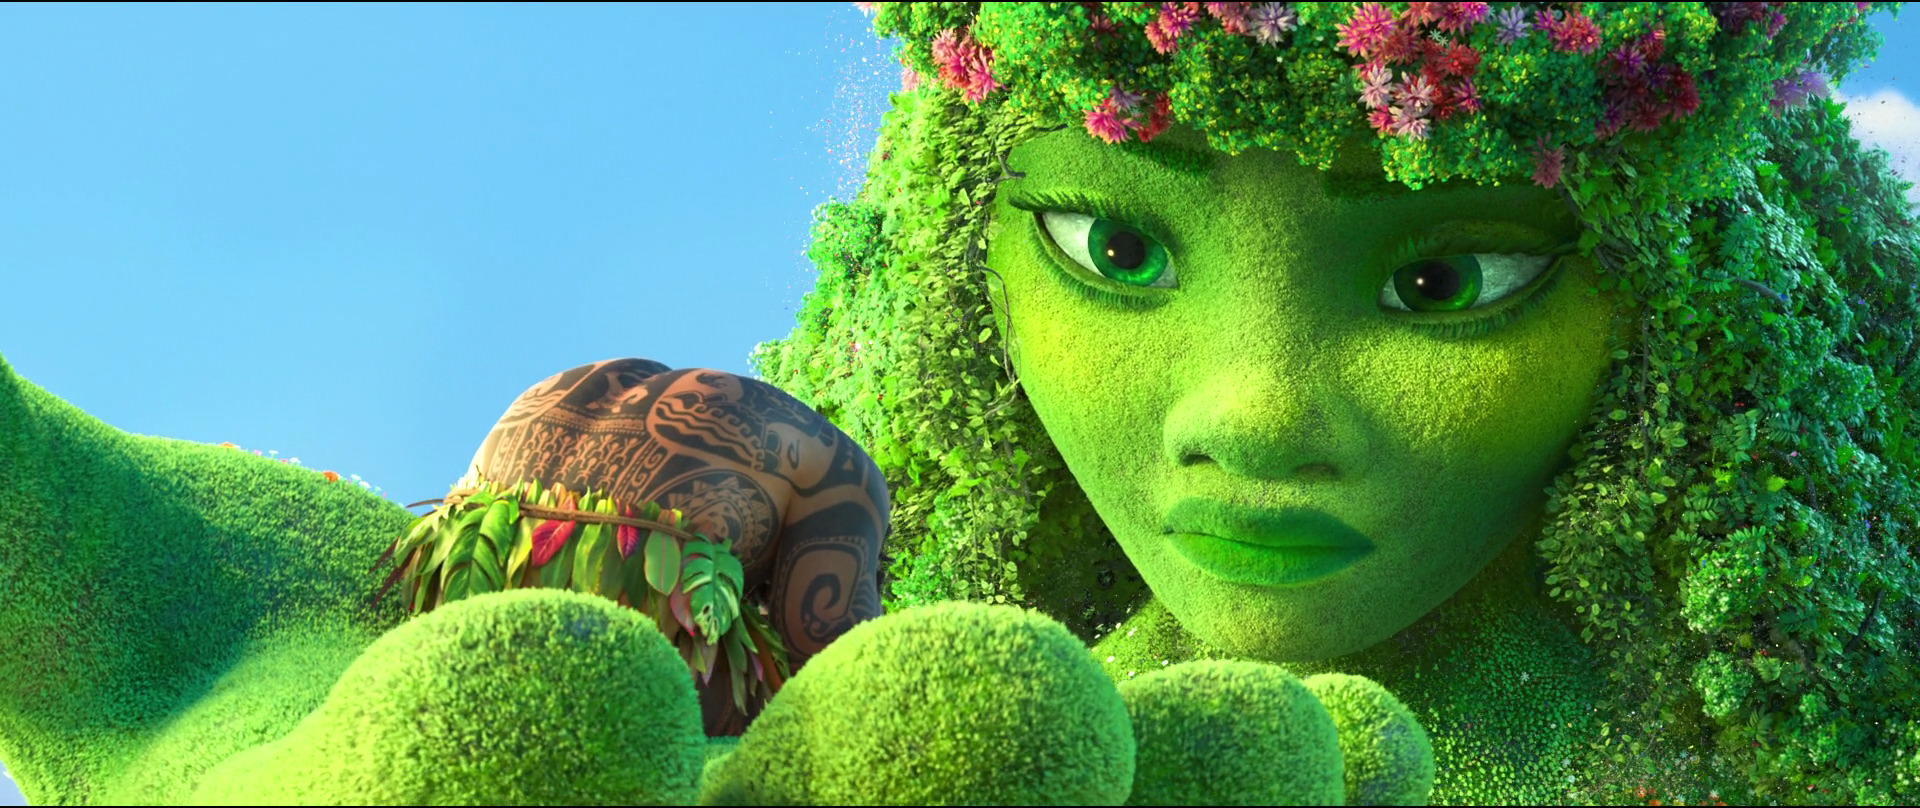 Who is the Green Lady in Moana?